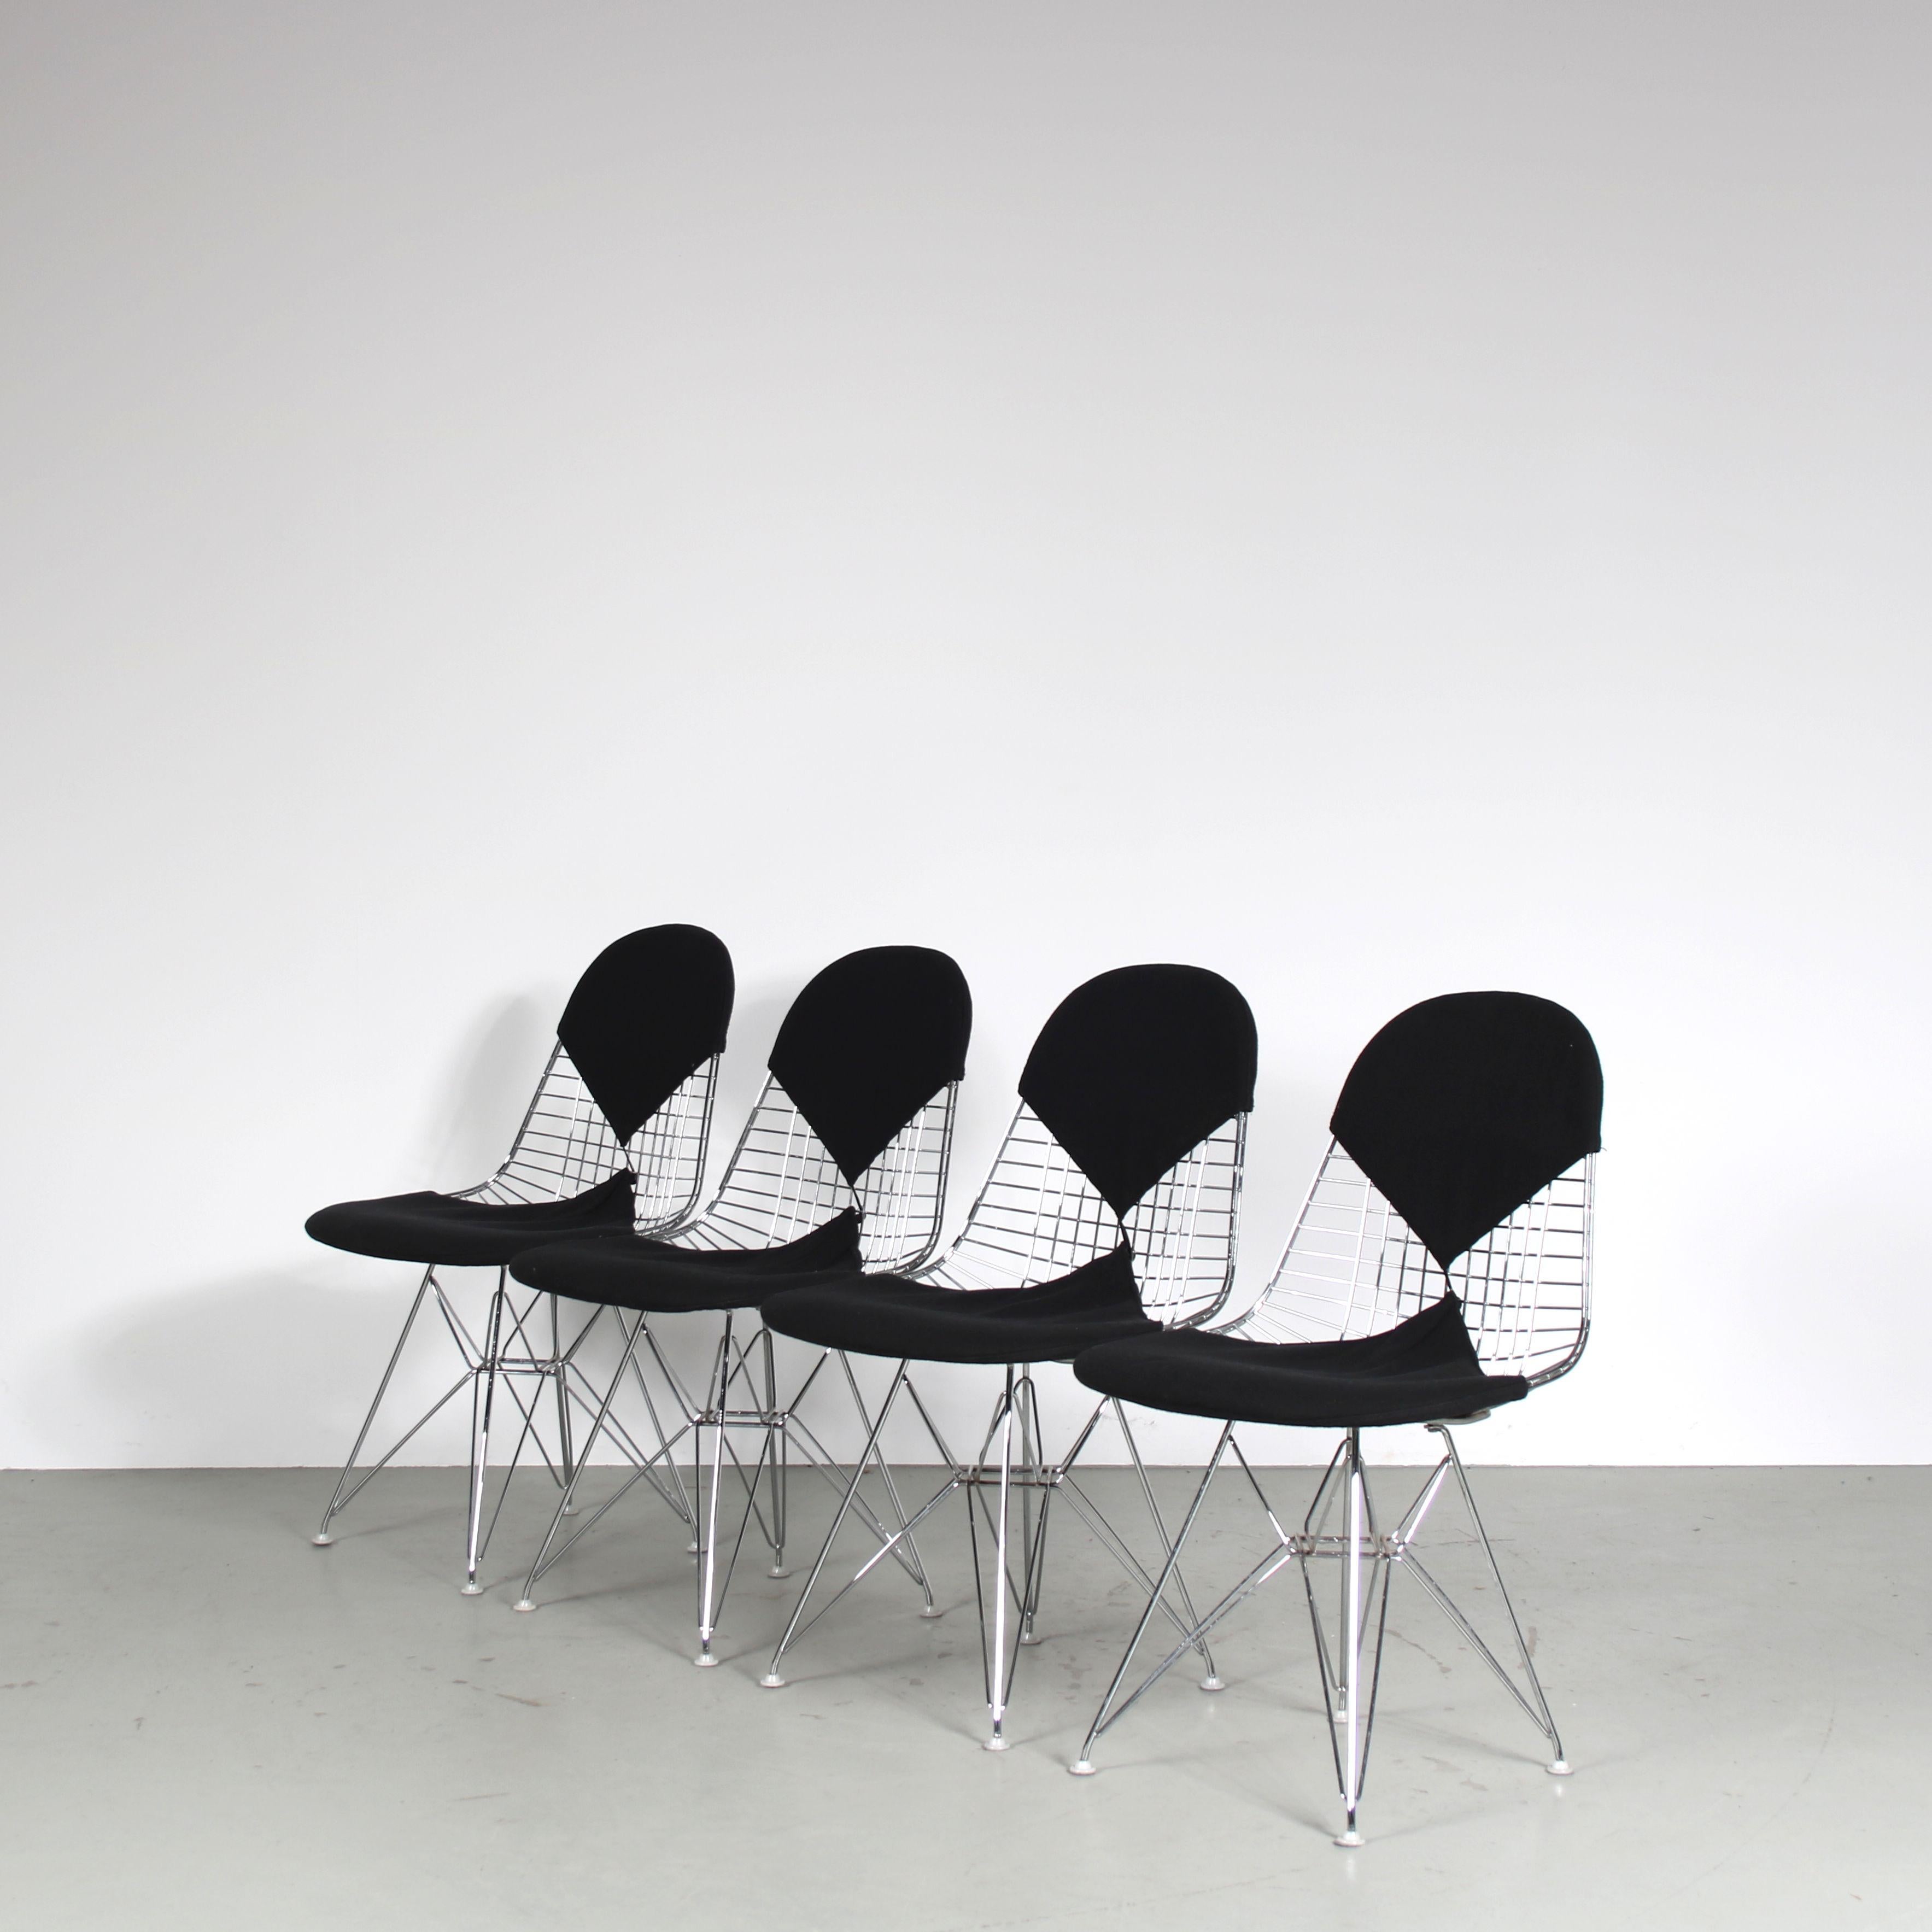 

This set of four dining chairs, also known as the “Bikini” chairs, was designed by the iconic design duo Charles and Ray Eames in the 1950s. This particular set is a later 1990s production by Vitra in Germany, featuring chrome wire metal frames